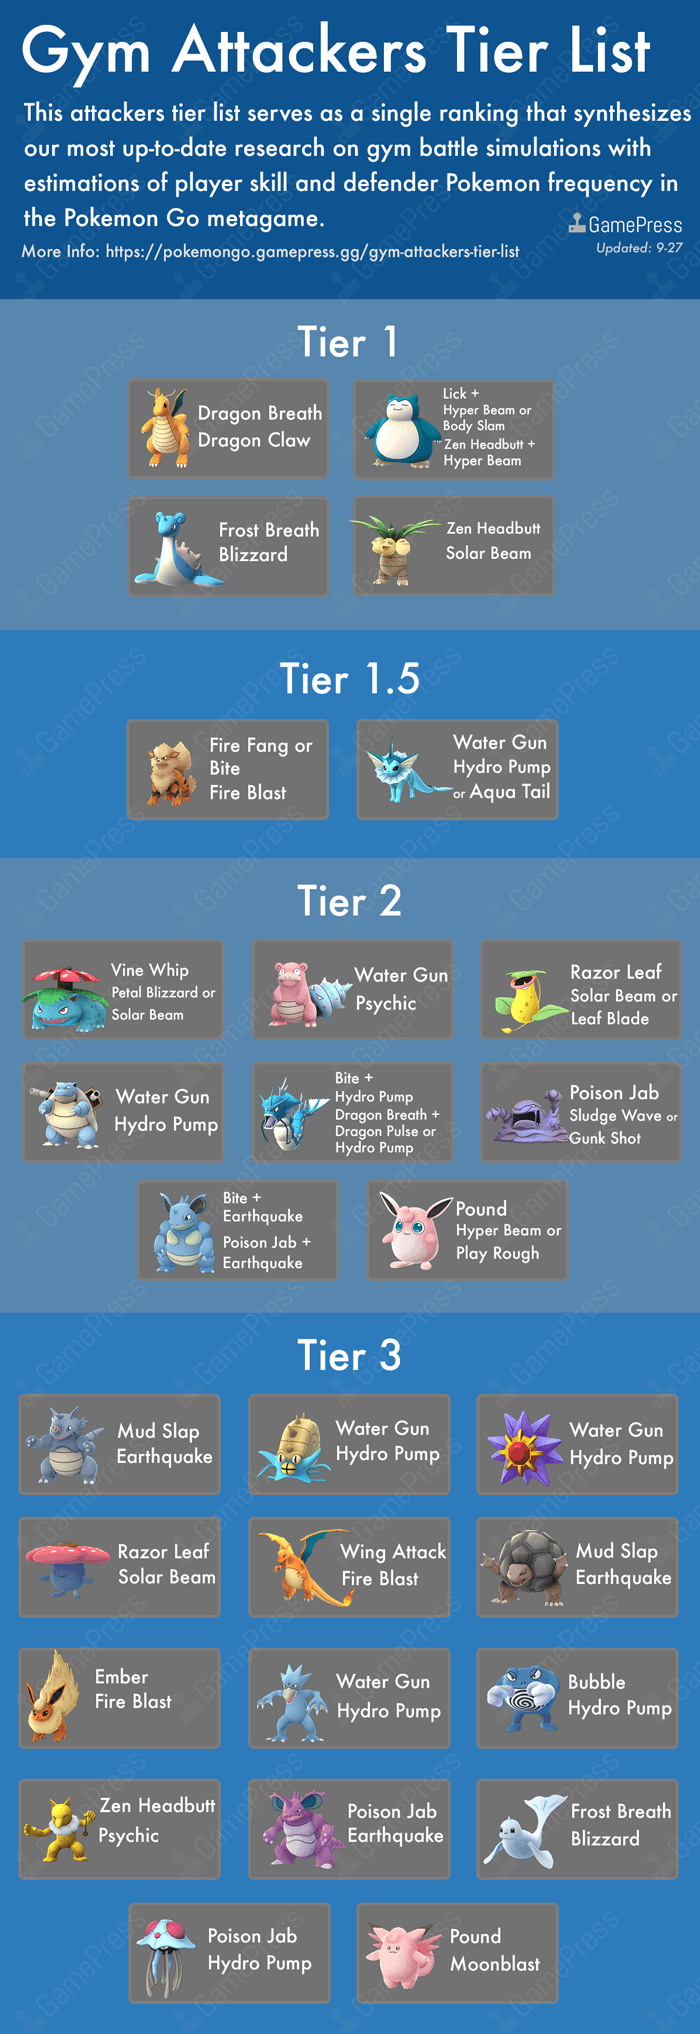 attackers-tier-list-9-26_1